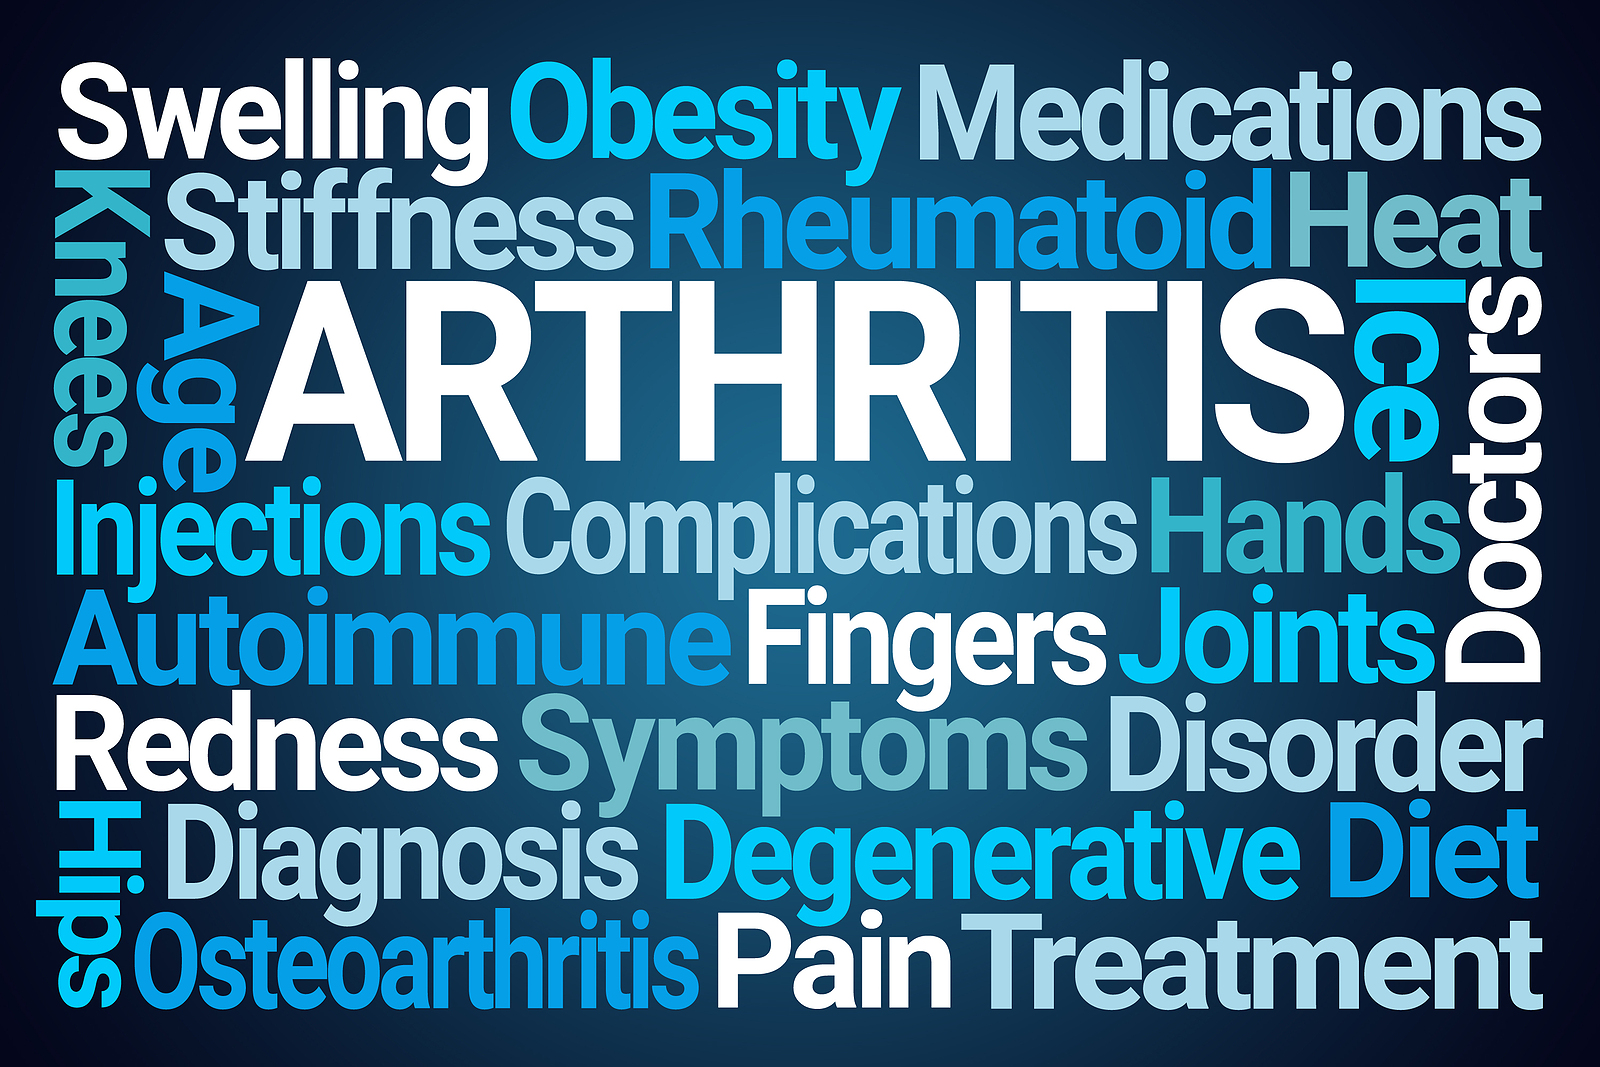 Arthritis: Causes, types, and treatments